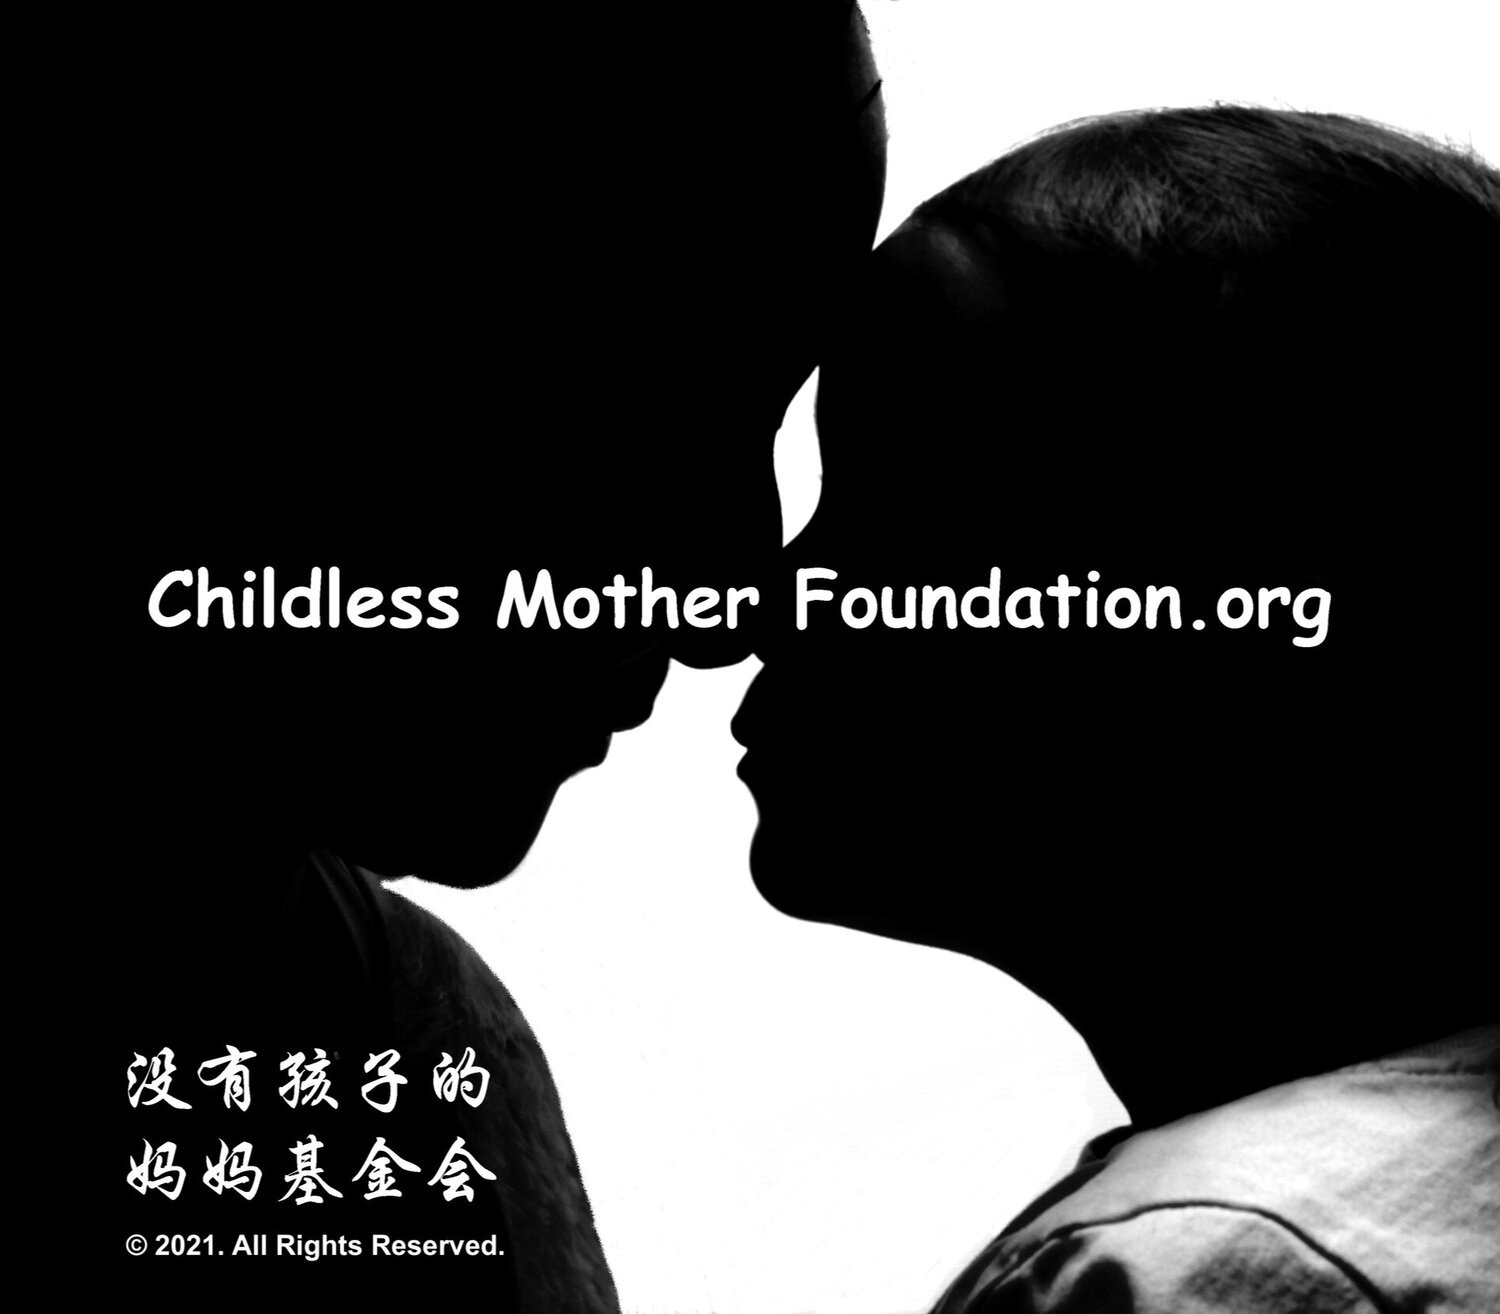 Childless Mother Foundation